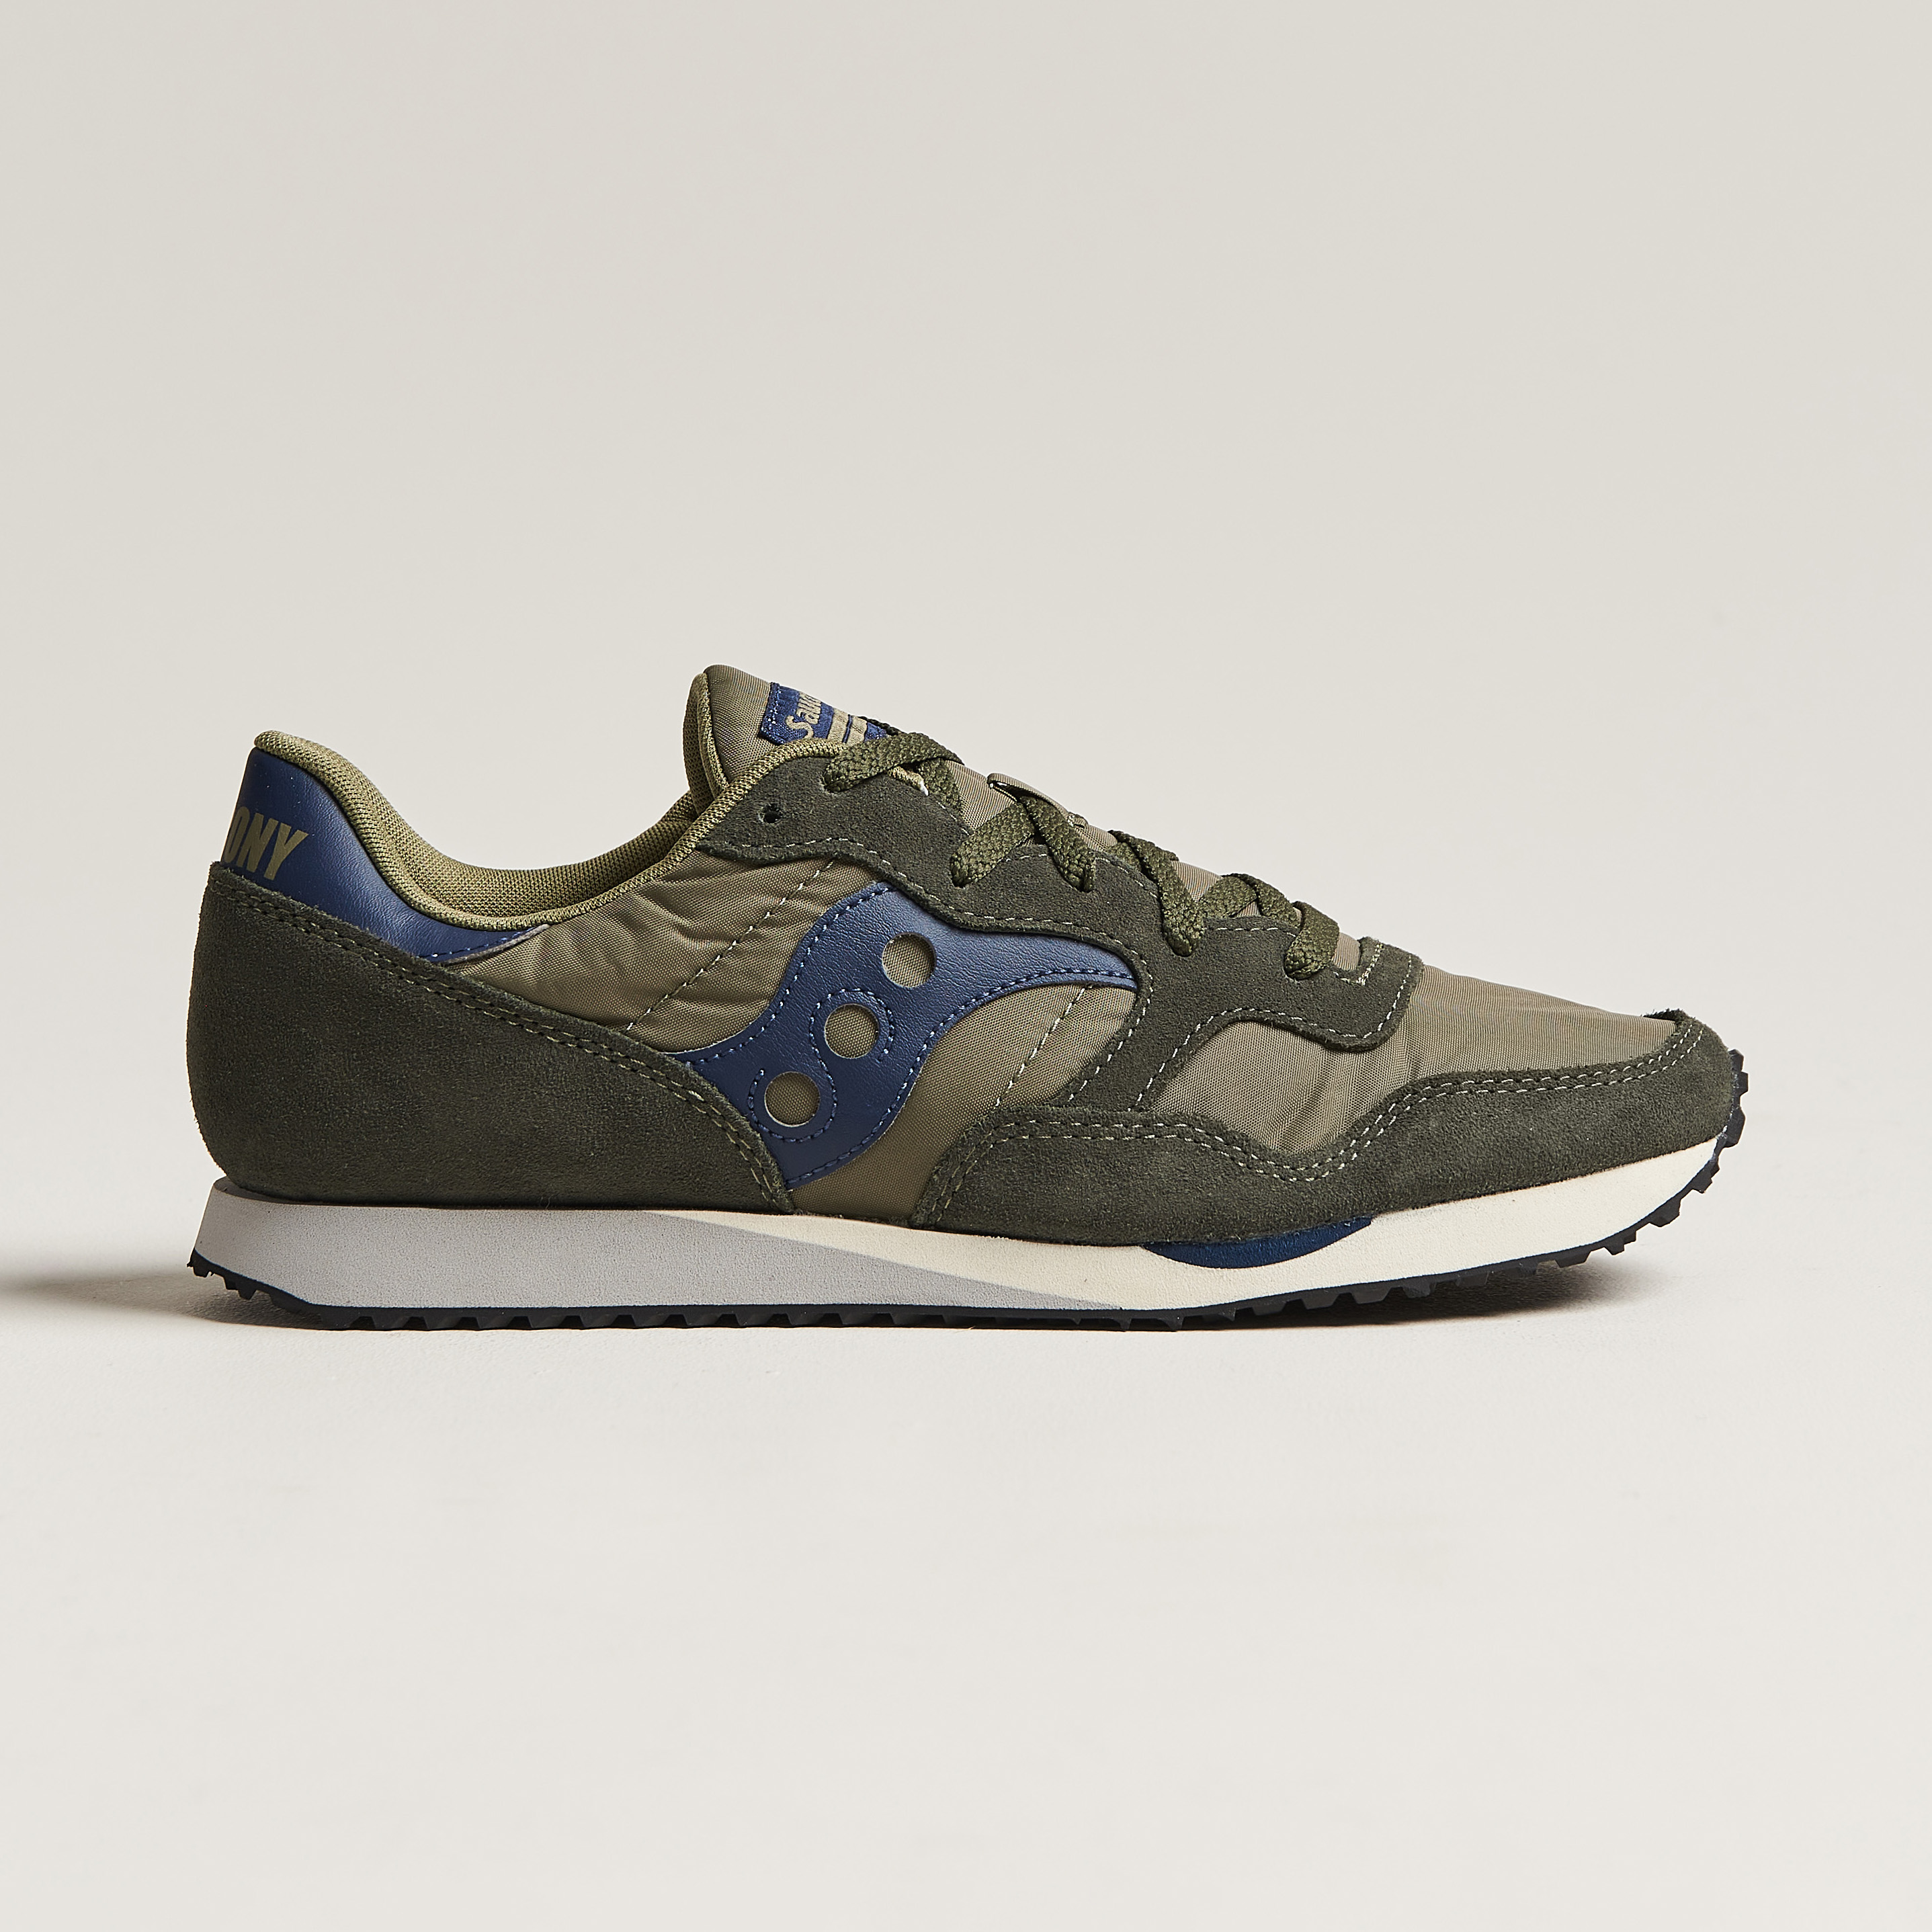 Saucony DXN Trainer Sneaker Green/Navy at CareOfCarl.com